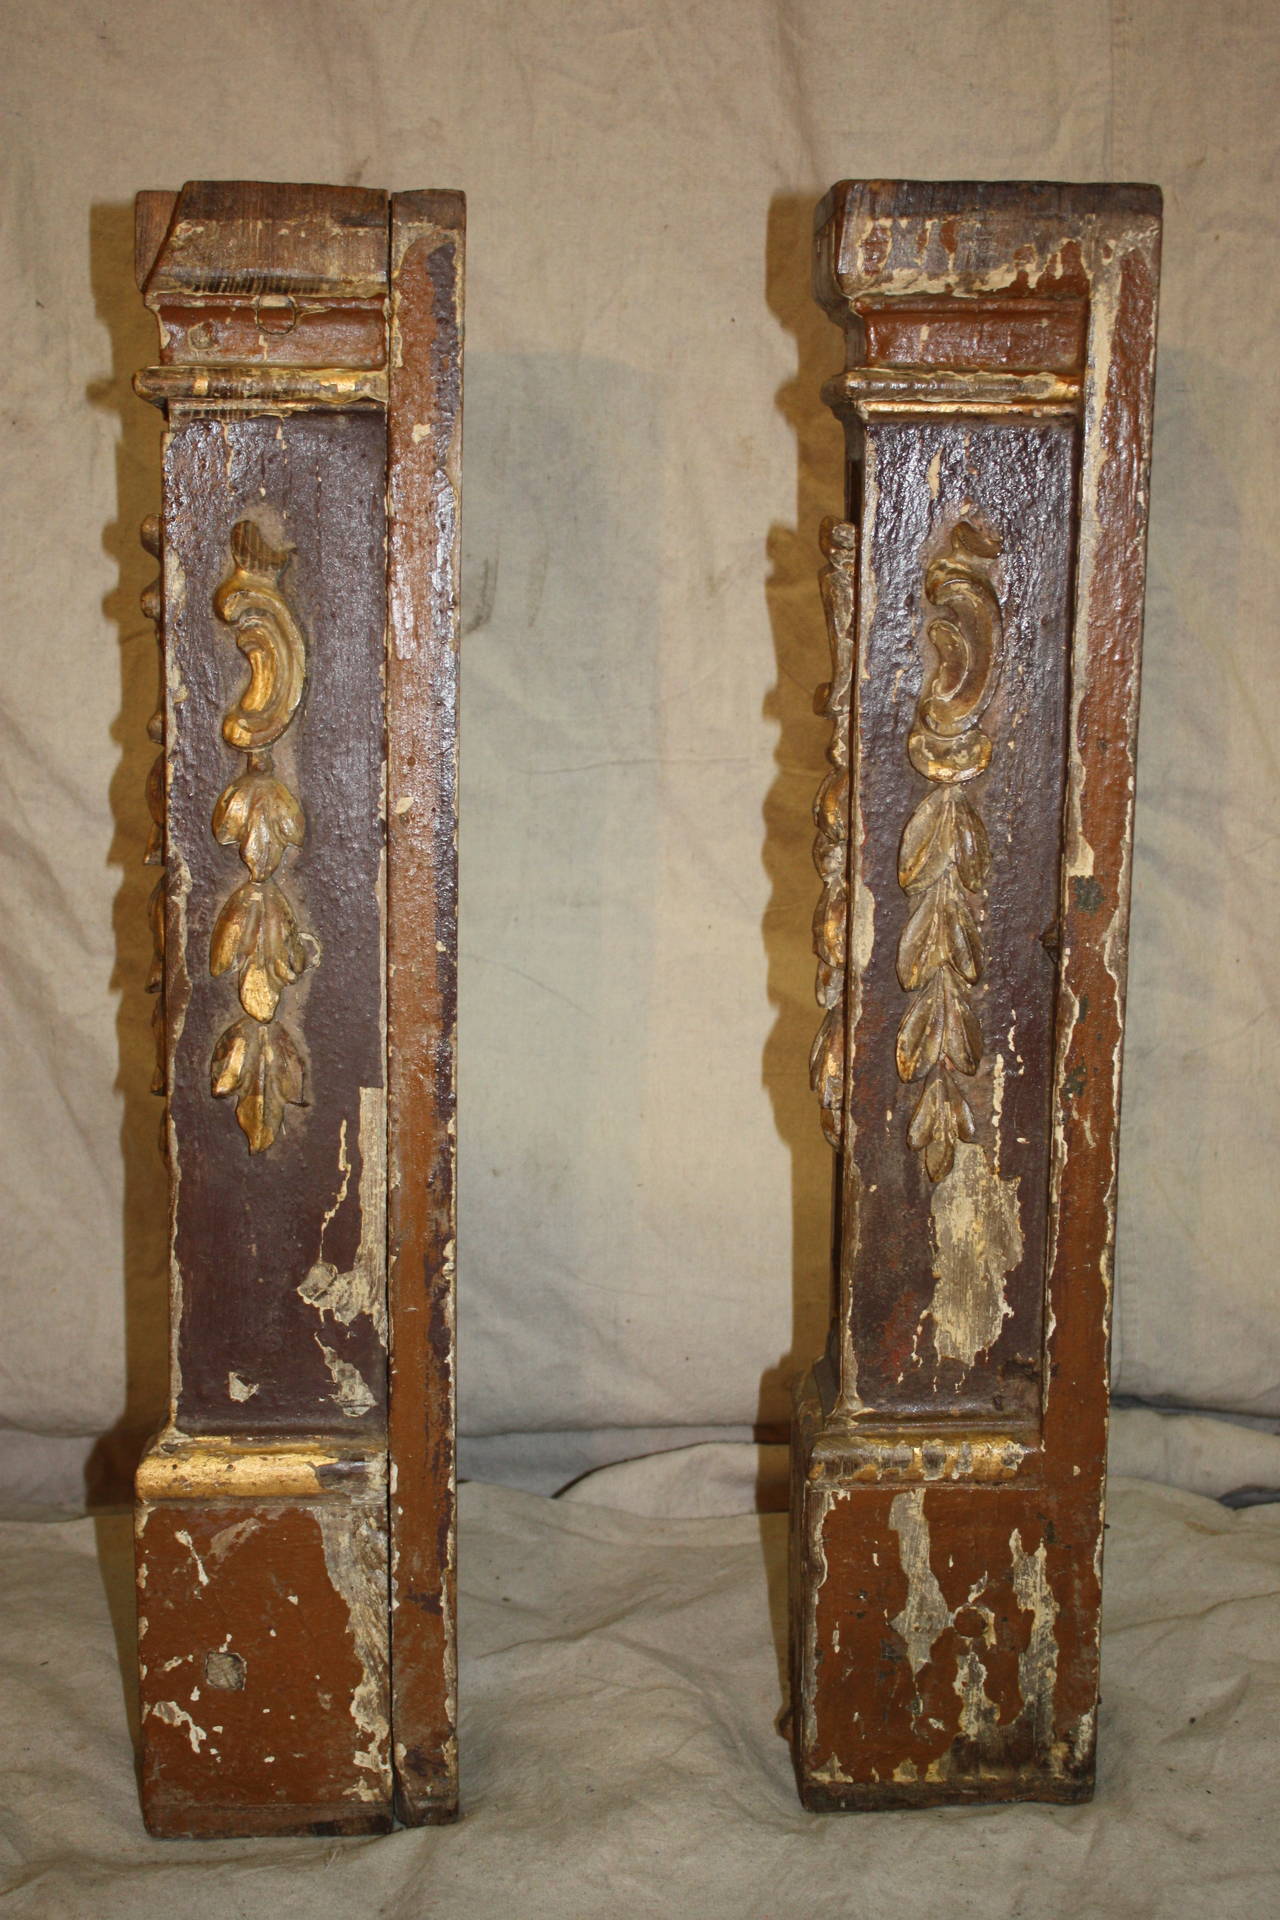 18th century pair of Italian pedestals, painted and gilt, they can be used as ornaments.